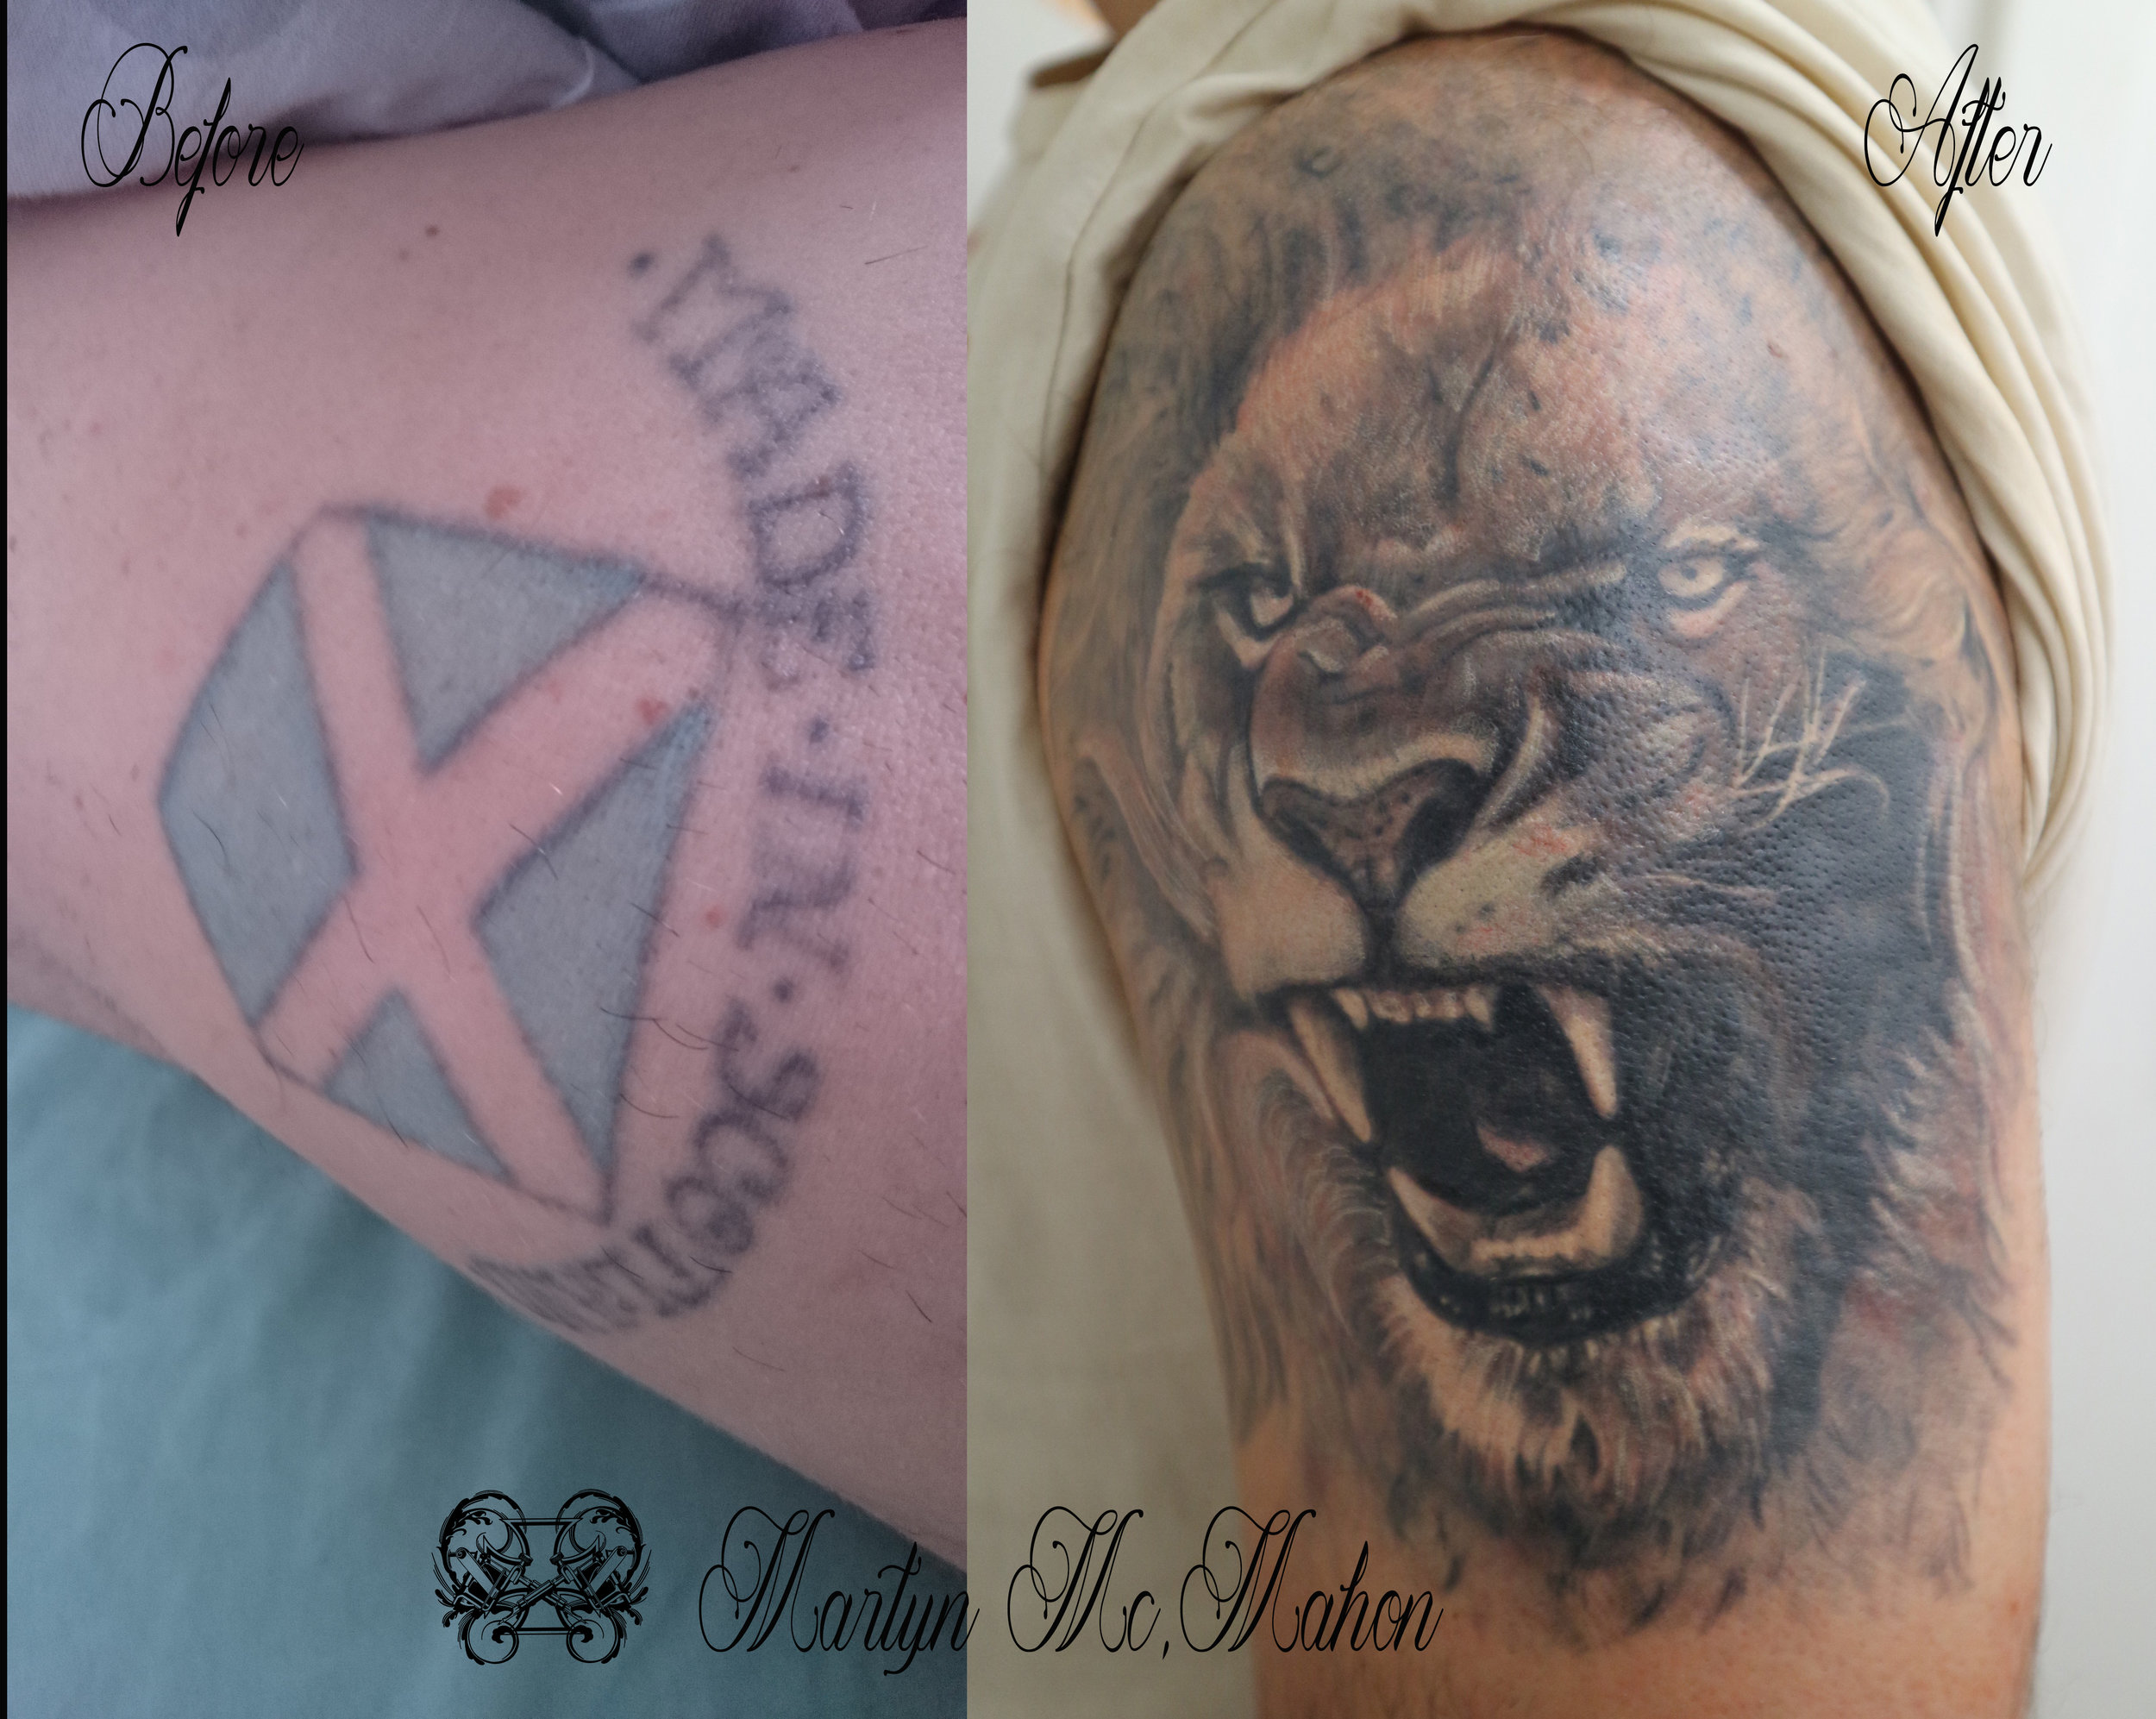 Martyn - Saltire Lion cover up.jpg